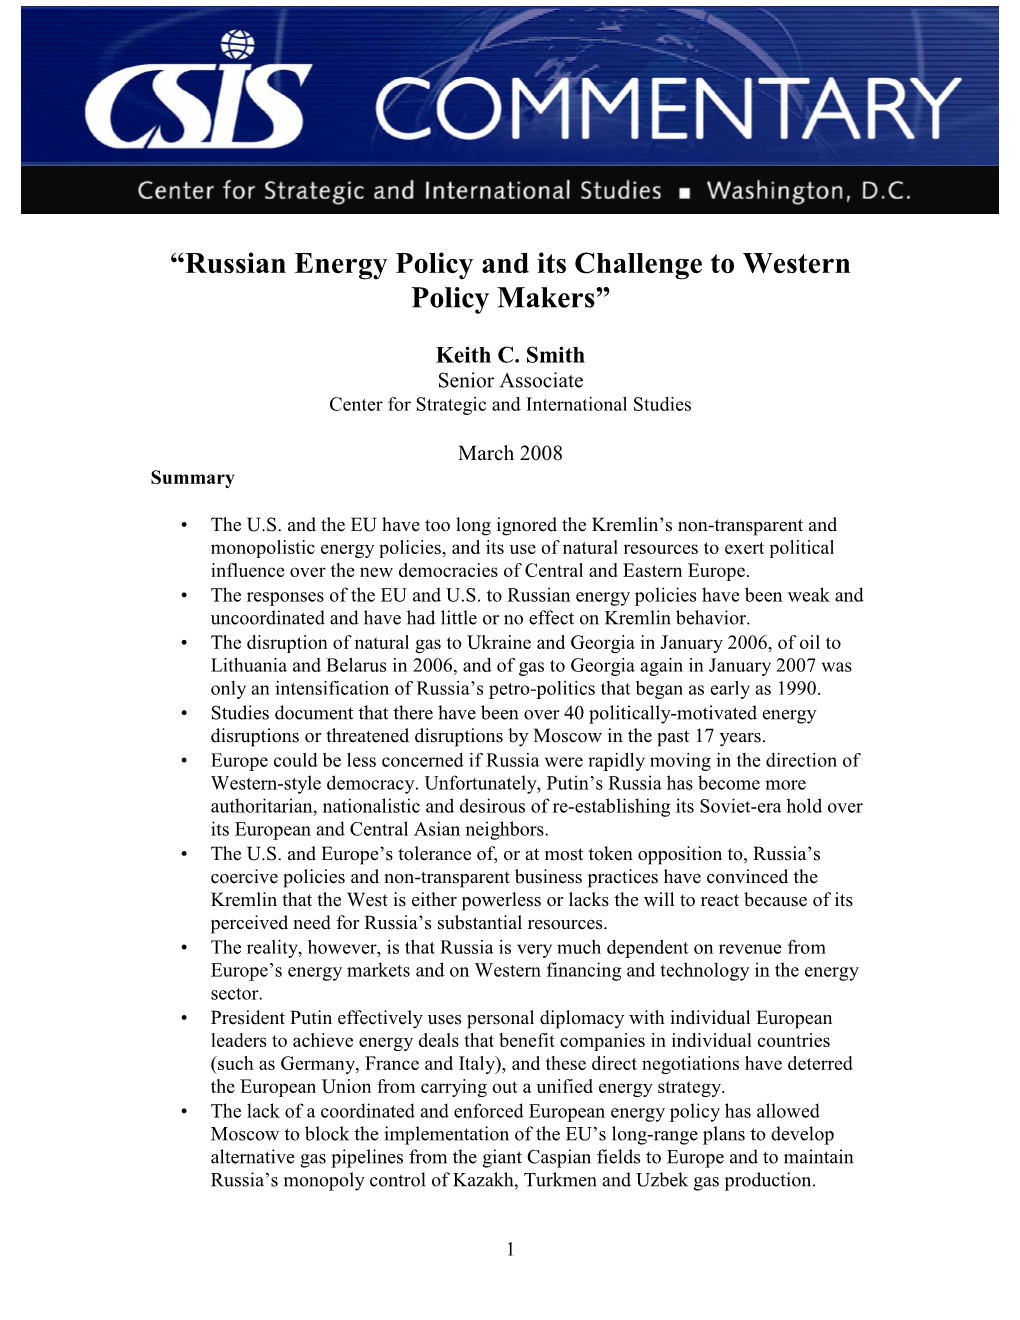 “Russian Energy Policy and Its Challenge to Western Policy Makers”